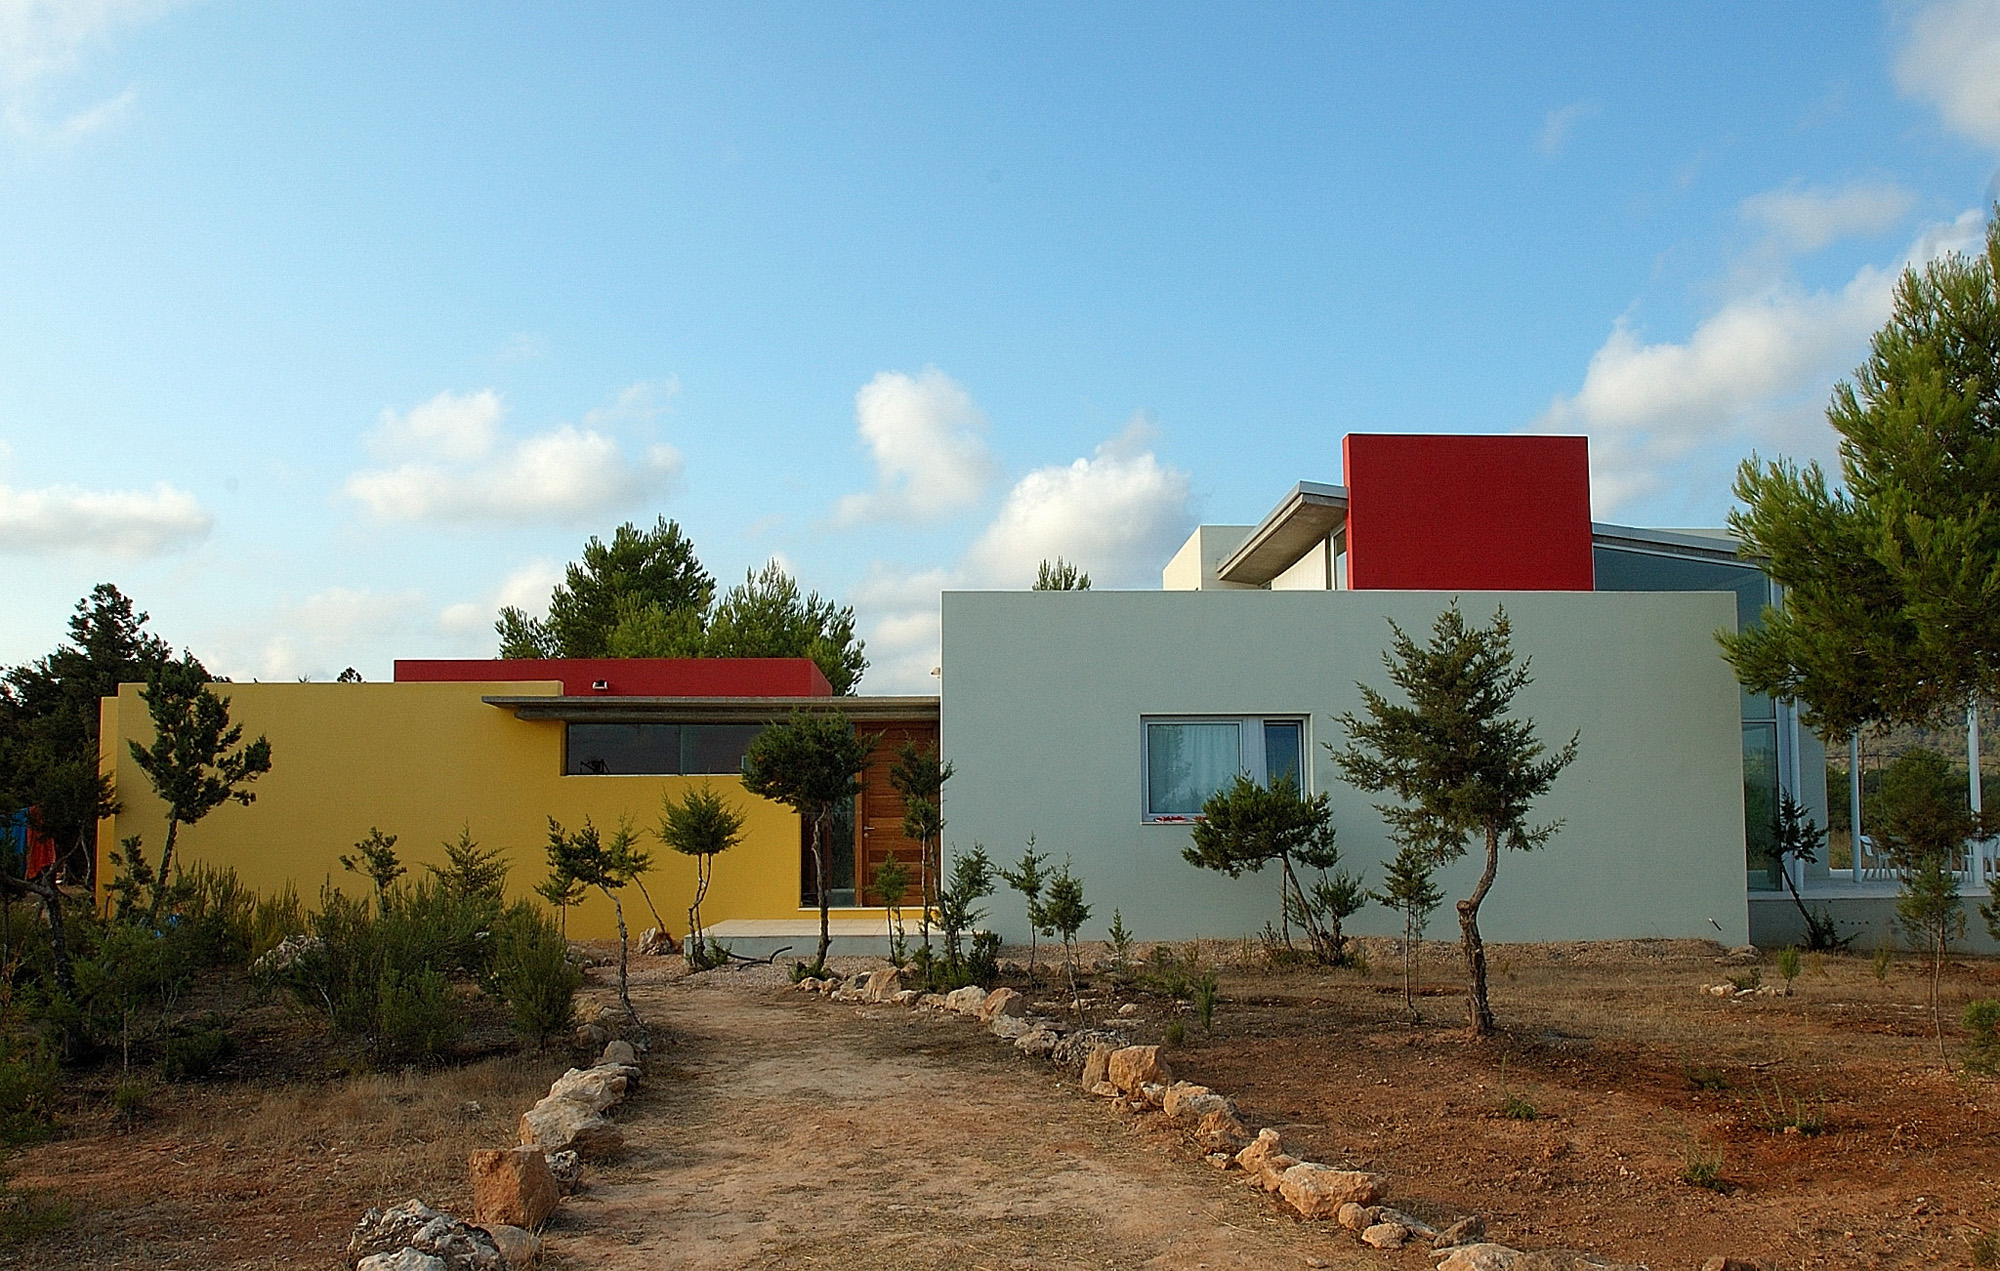 Colourful house by Pep Torres - contemporary architecture and design studio in Ibiza